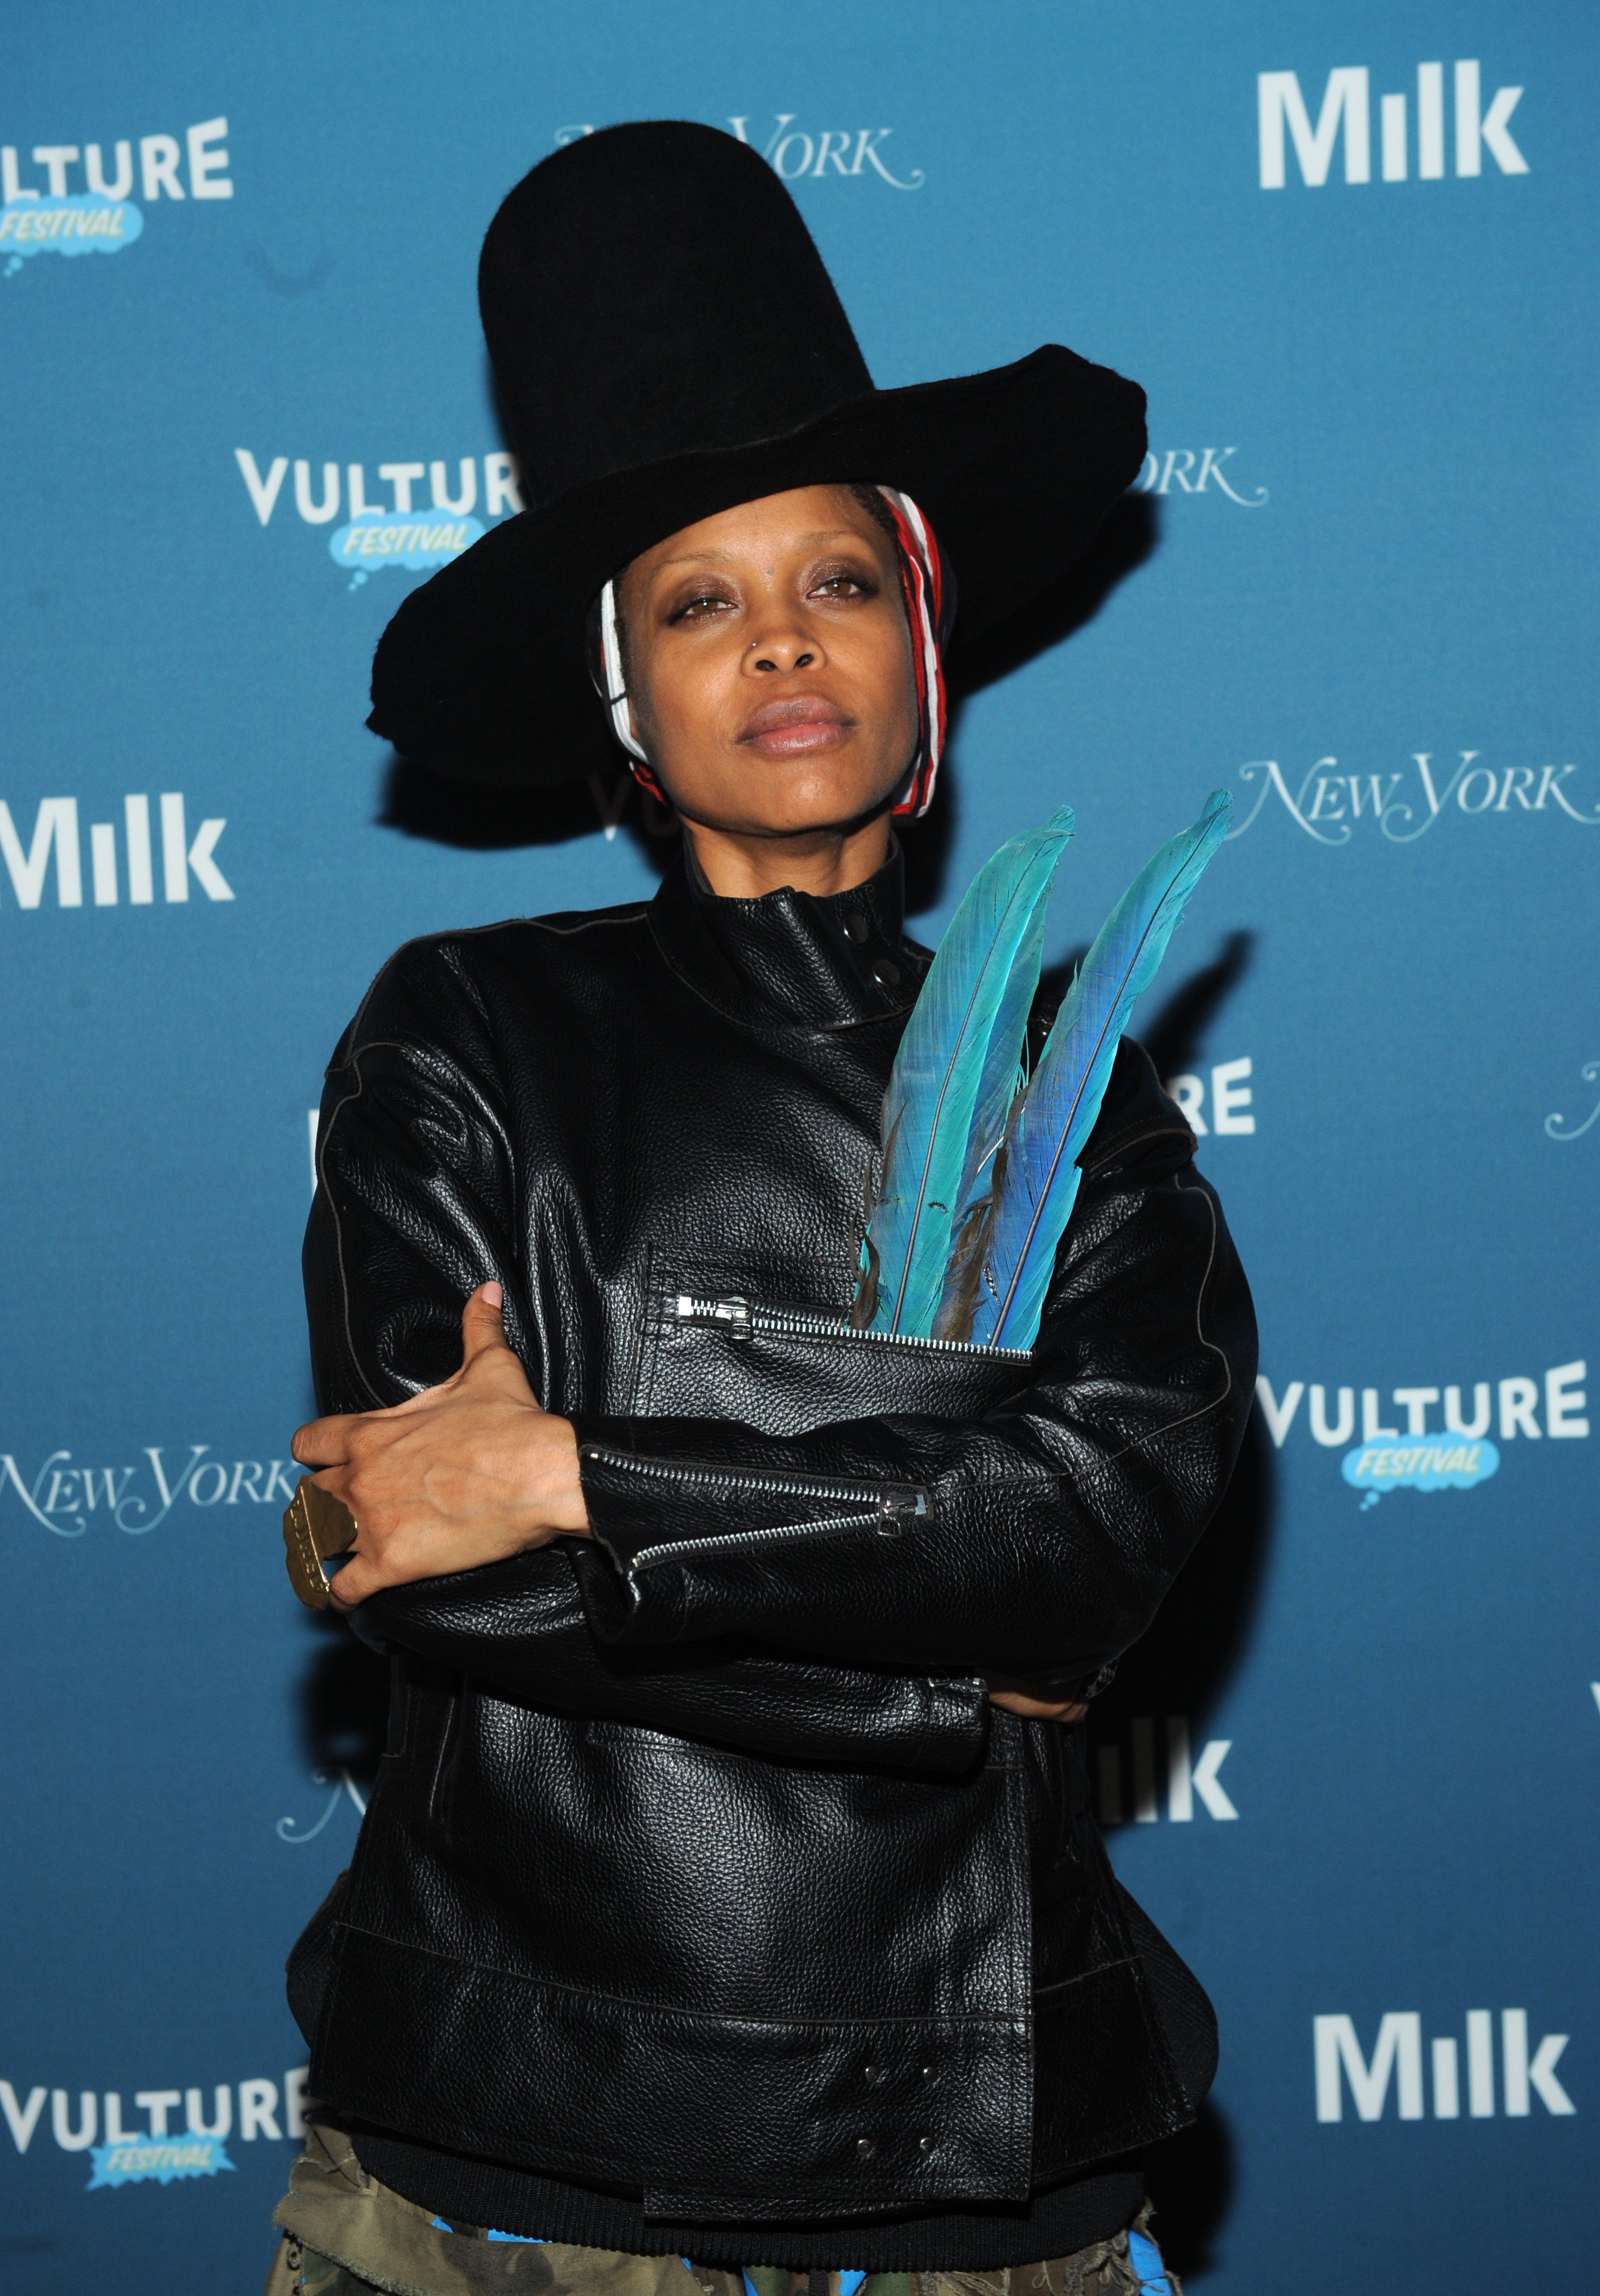  Erykah Badu at the Vulture Festival opening night party in New York City, 2014 | Source: Getty Images